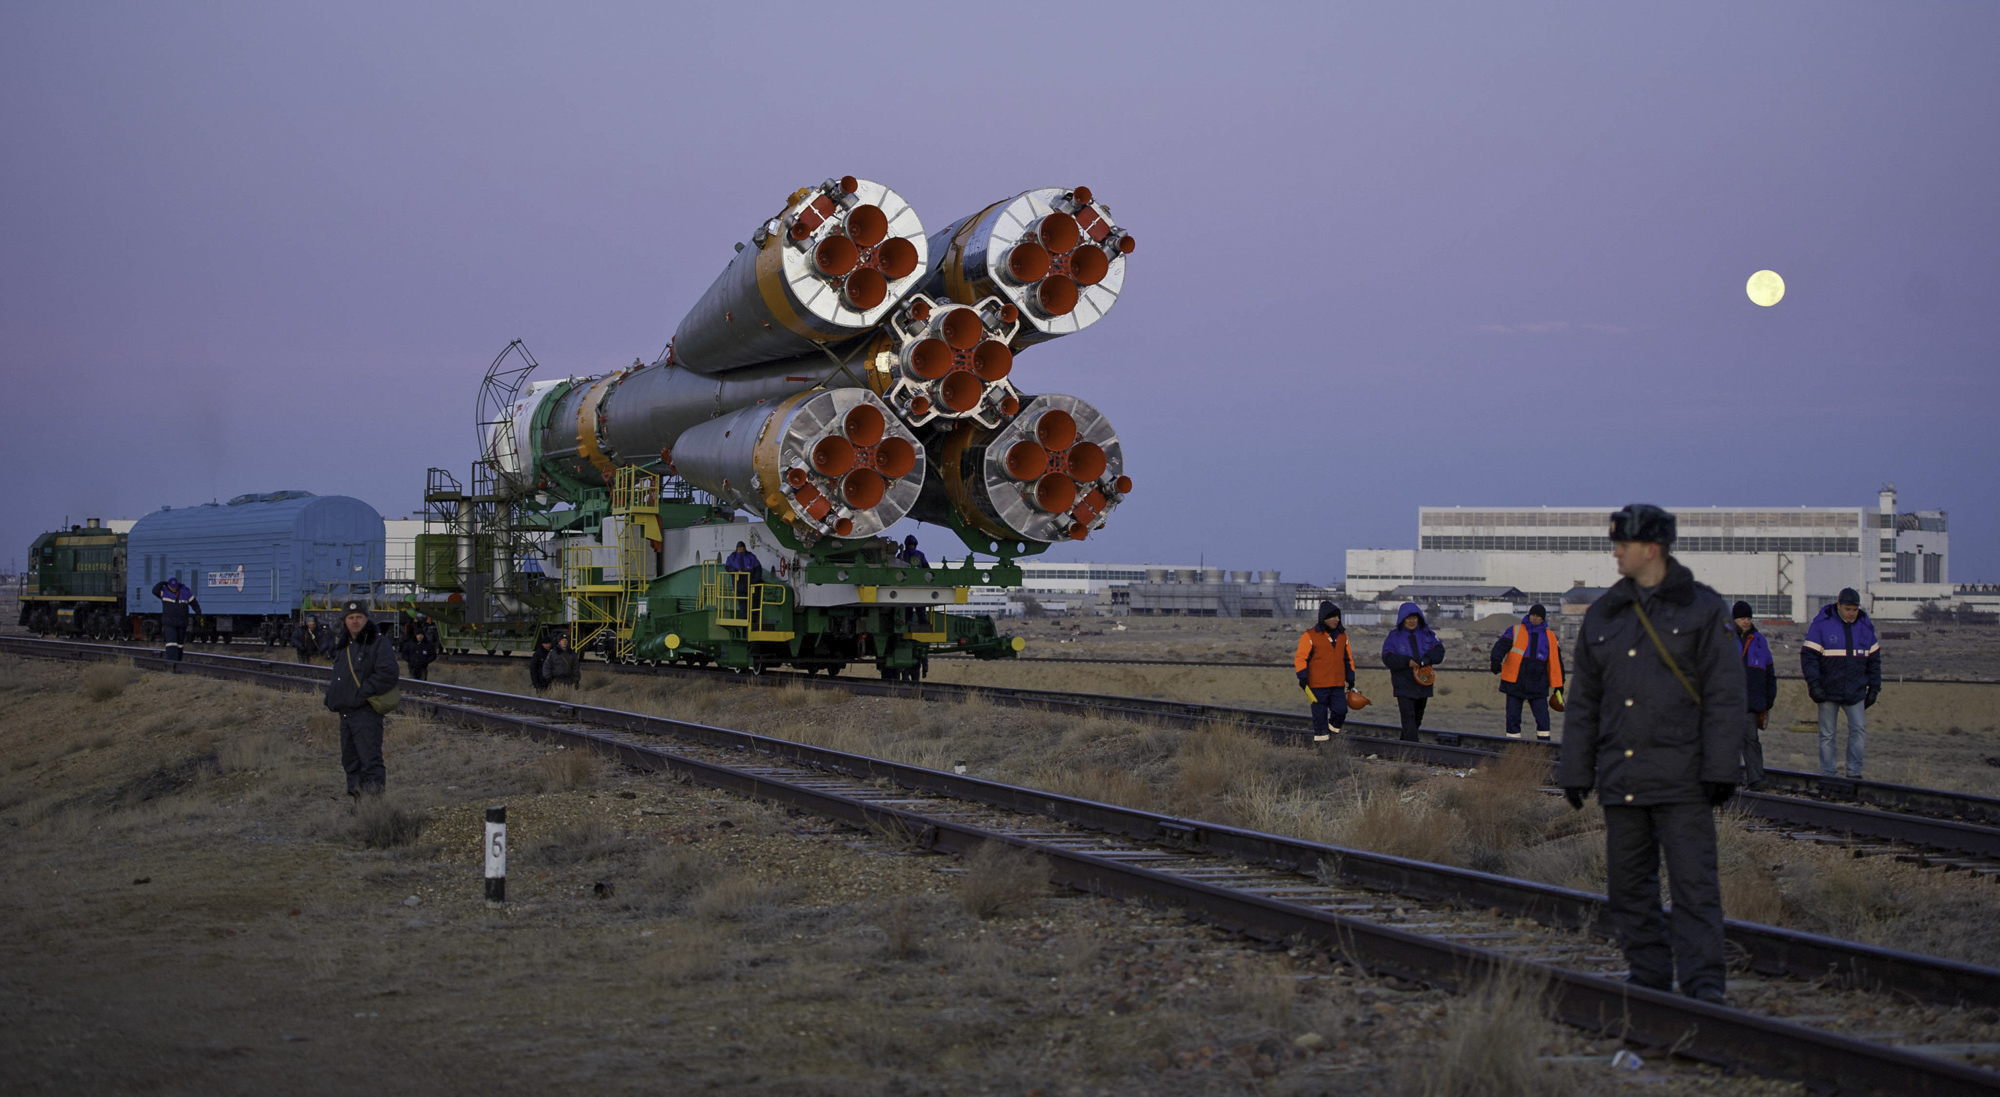  The Soyuz TMA-22 spacecraft is rolled out by train on its way to the launch pad at the Baikonur Cosmodrome, Kazakhstan, Friday, Nov. 11, 2011. The launch of the Soyuz spacecraft with Expedition 29 Soyuz Commander Anton Shkaplerov of Russia, NASA Fli